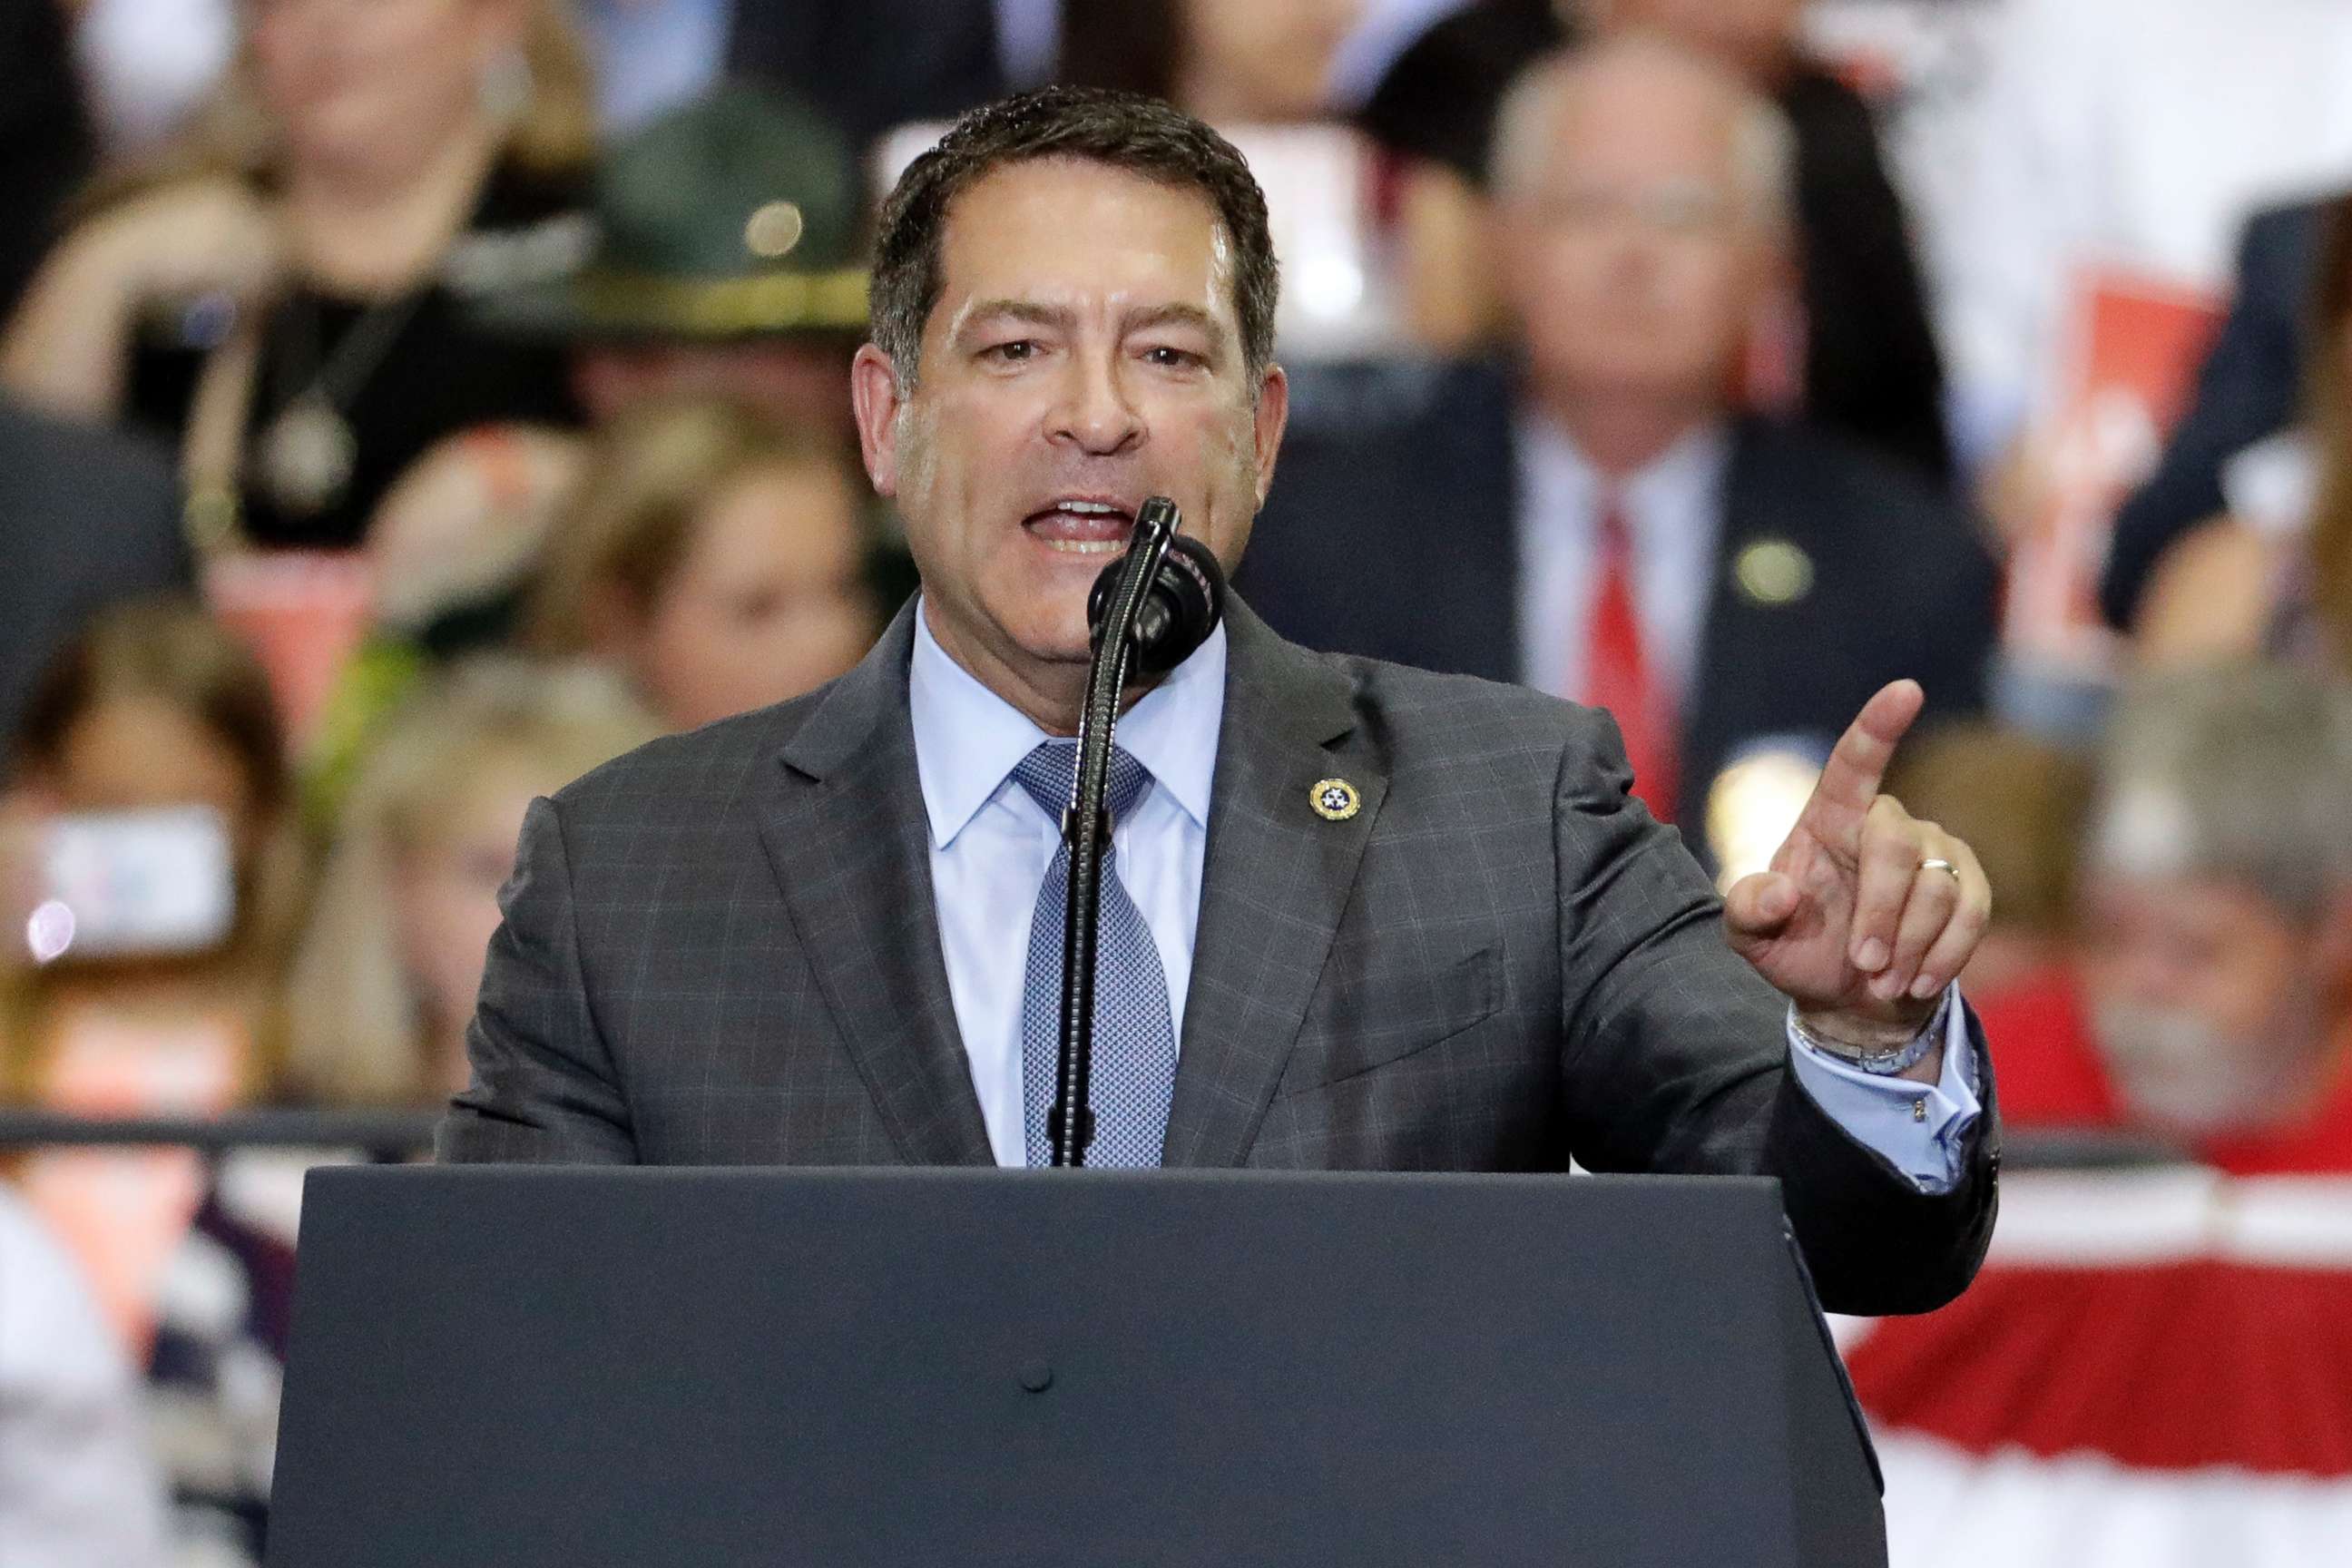 PHOTO: Tennessee State Senator Mark Green, R-Clarksville, speaks at a rally in this May 29, 2018 file photo in Nashville.